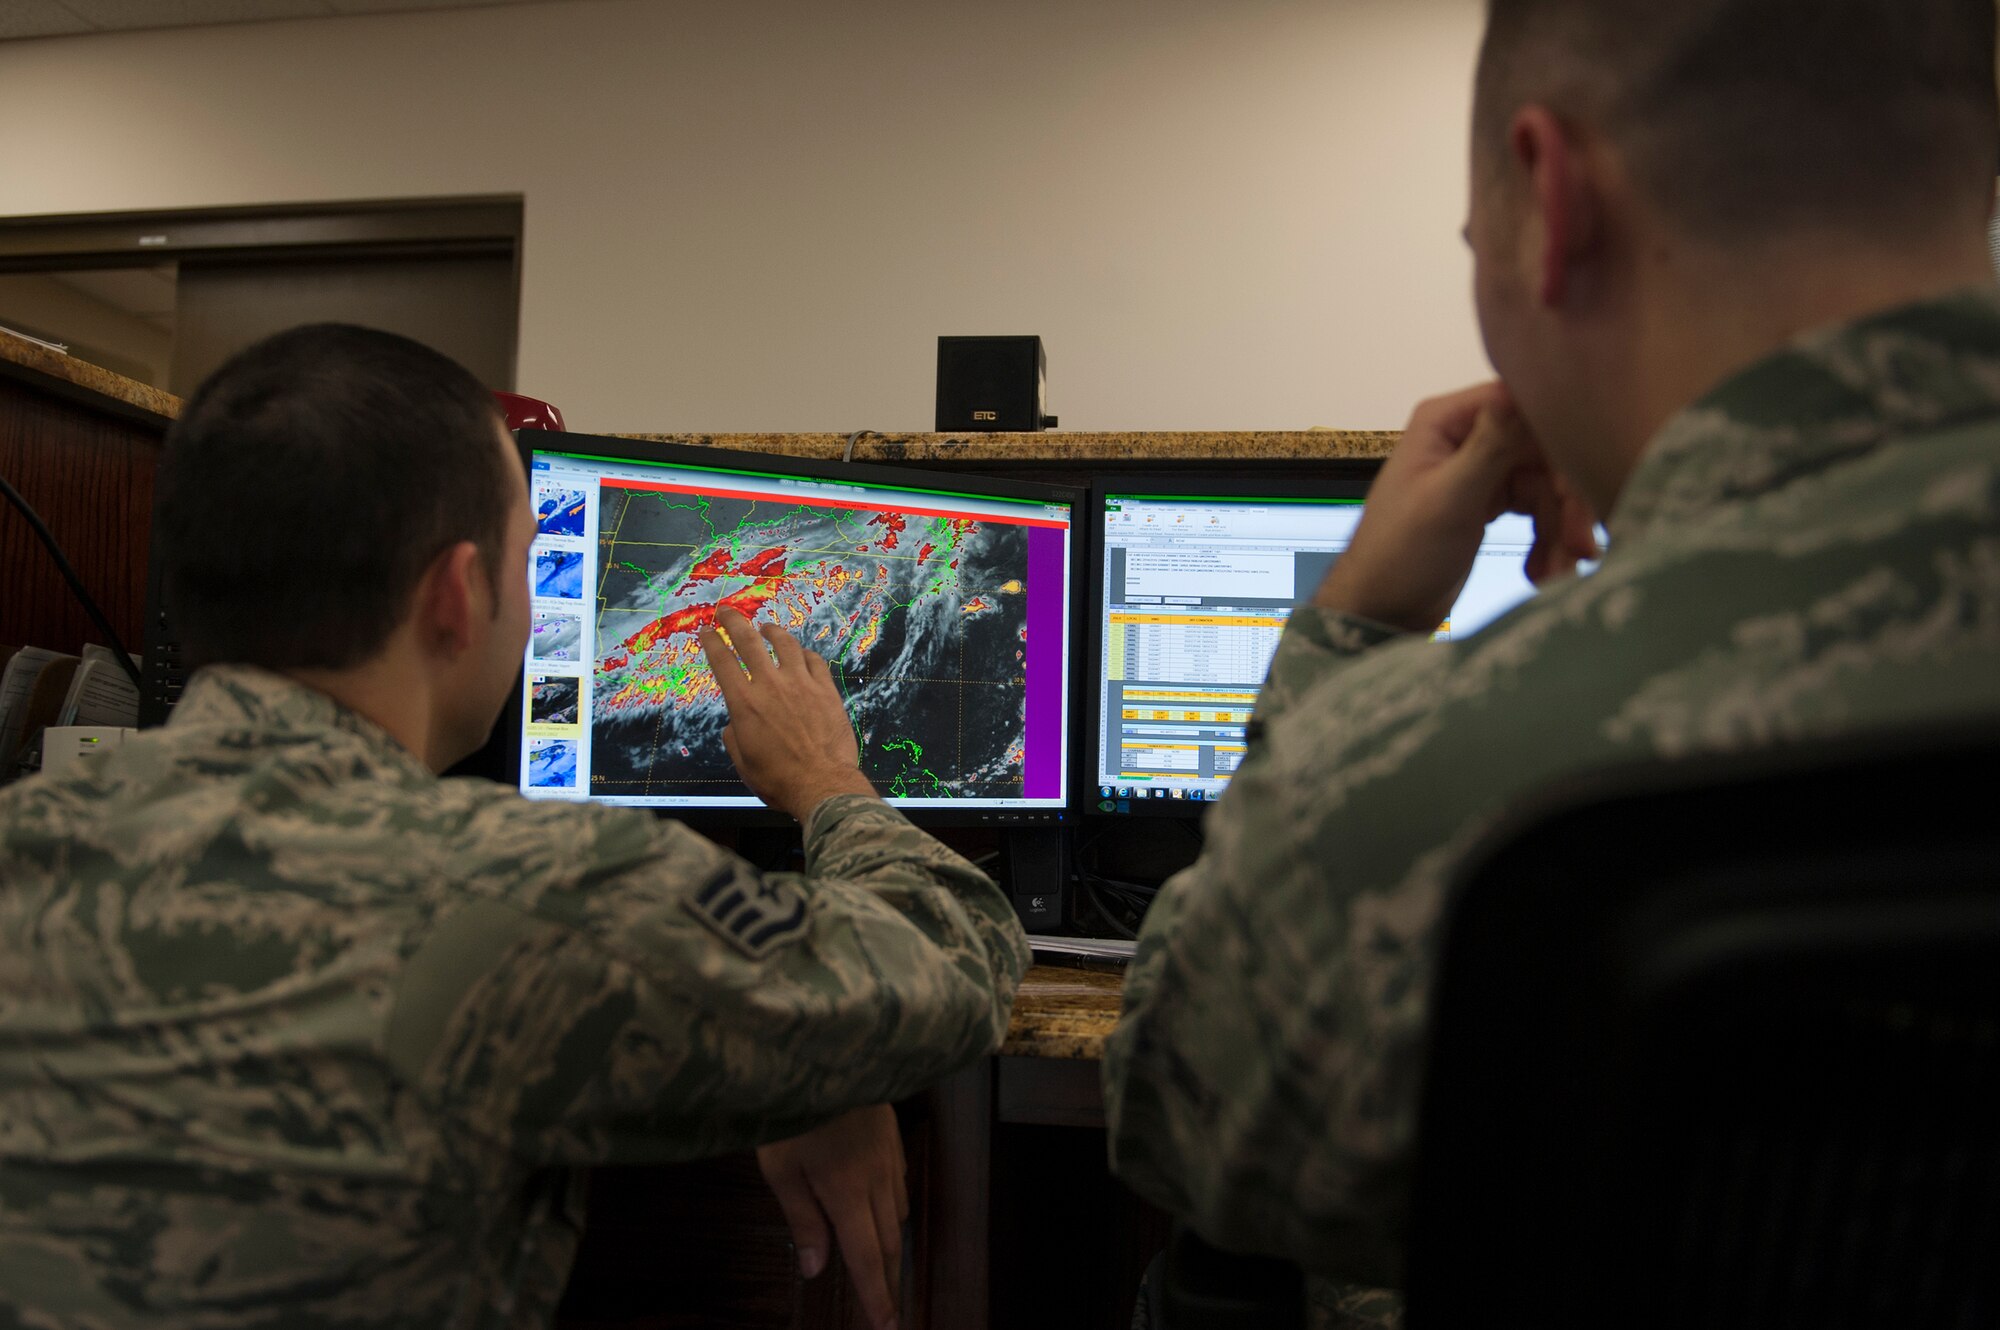 U.S. Air Force Staff Sgt. Mark Bratic, left, 23d Operations Support Squadron NCO in charge of airfield weather, briefs Airman 1st Class Lucas Payne, 23d OSS weather technician during a shift change Sept. 21, 2015, at Moody Air Force Base, Ga. Forecasters conduct these briefs to incoming shift members to inform them of what the weather forecast status in the last eight hours and what is expected to happen in the next 24 hours. (U.S. Air Force photo by Airman 1st Class Kathleen D. Bryant/Released)
